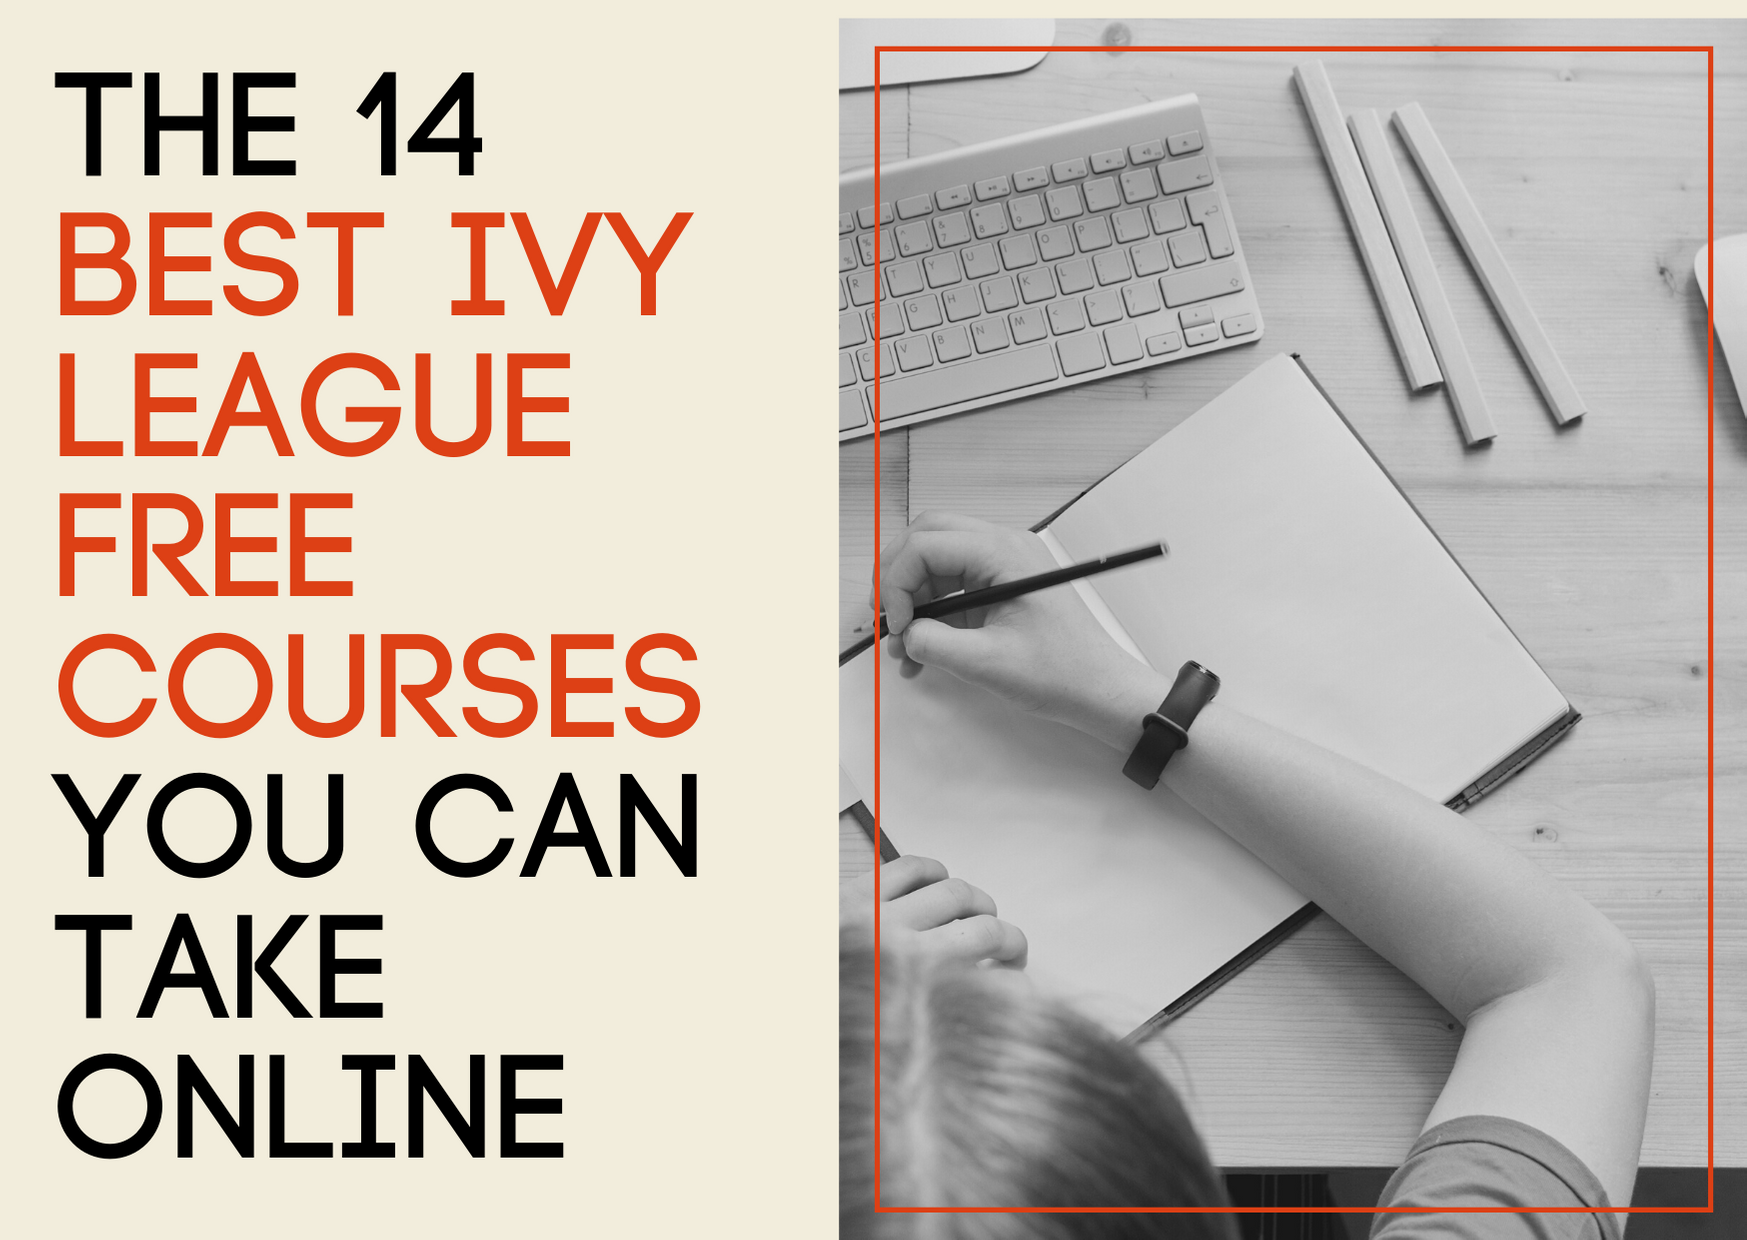 Here are 850+ Ivy League Courses You Can Take Right Now for Free